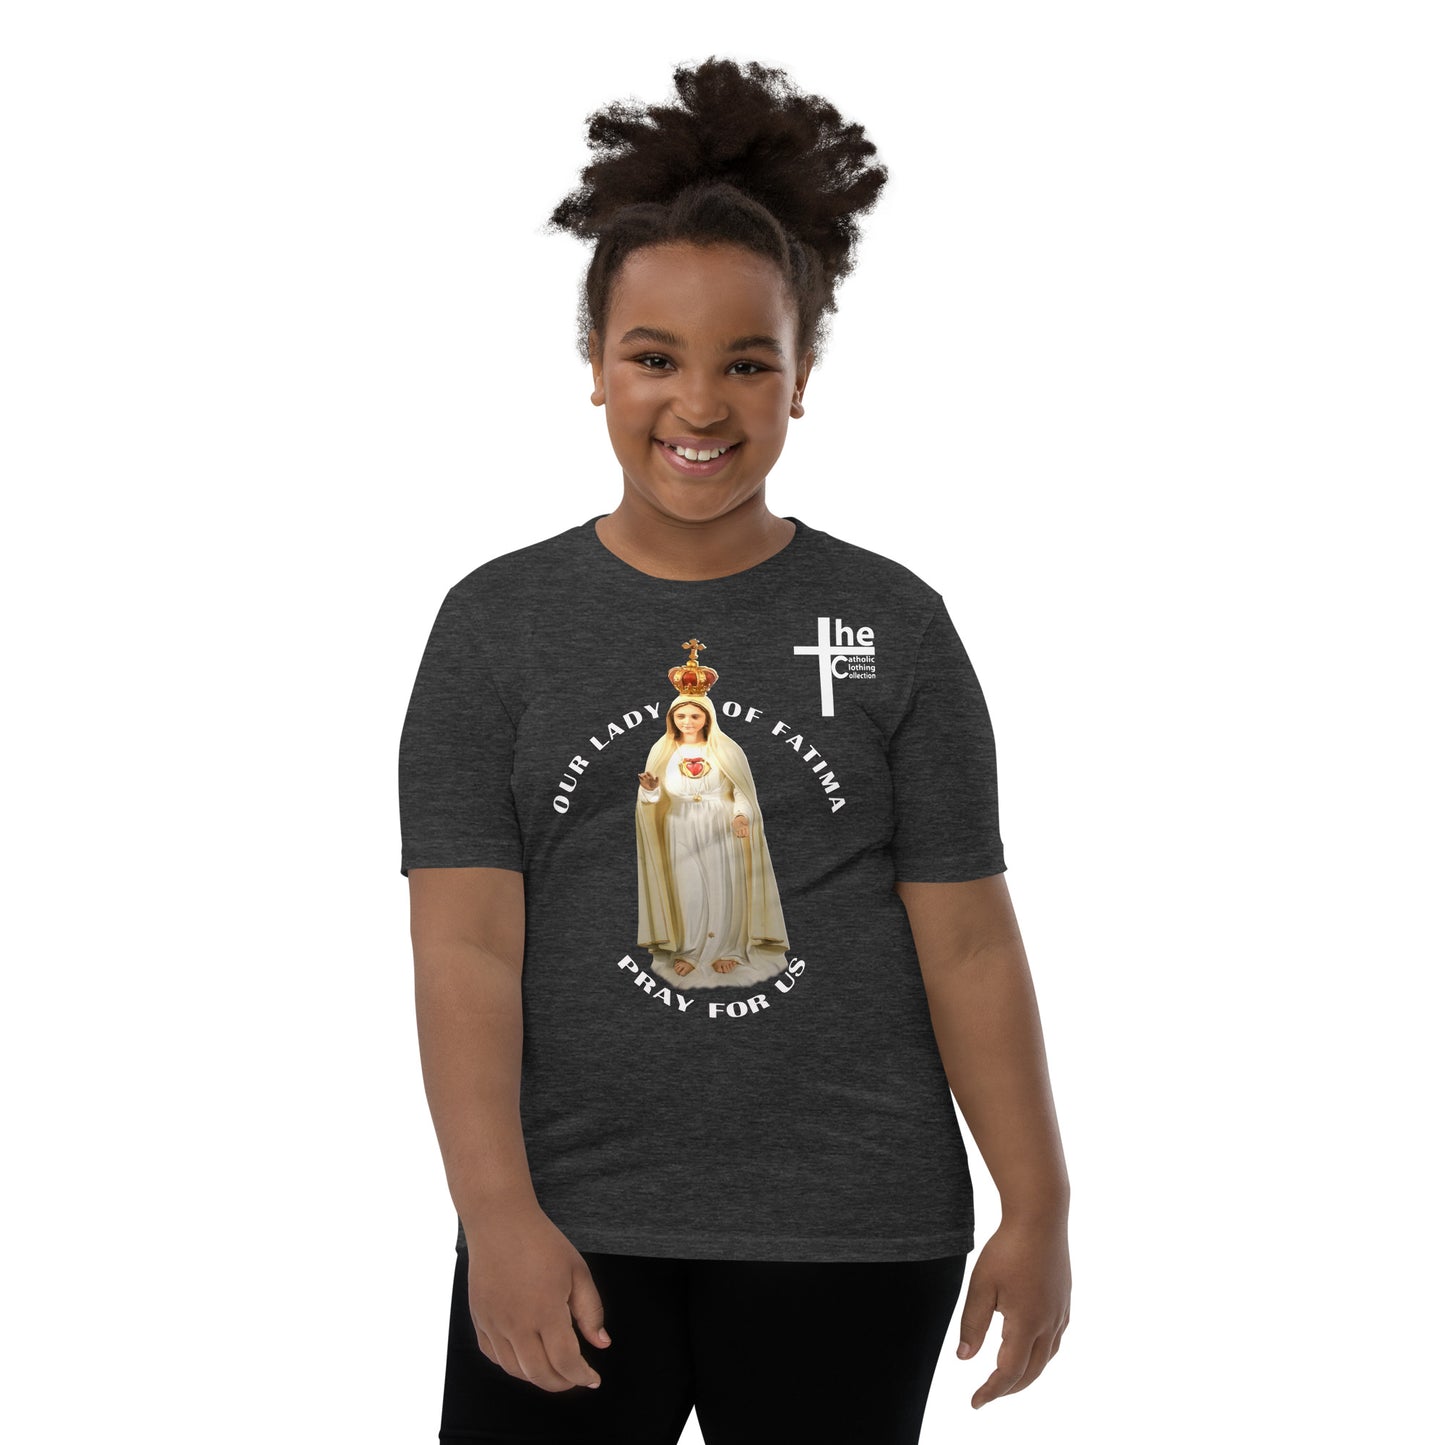 Our Lady of Fatima Pray for Us Children's t-Shirt